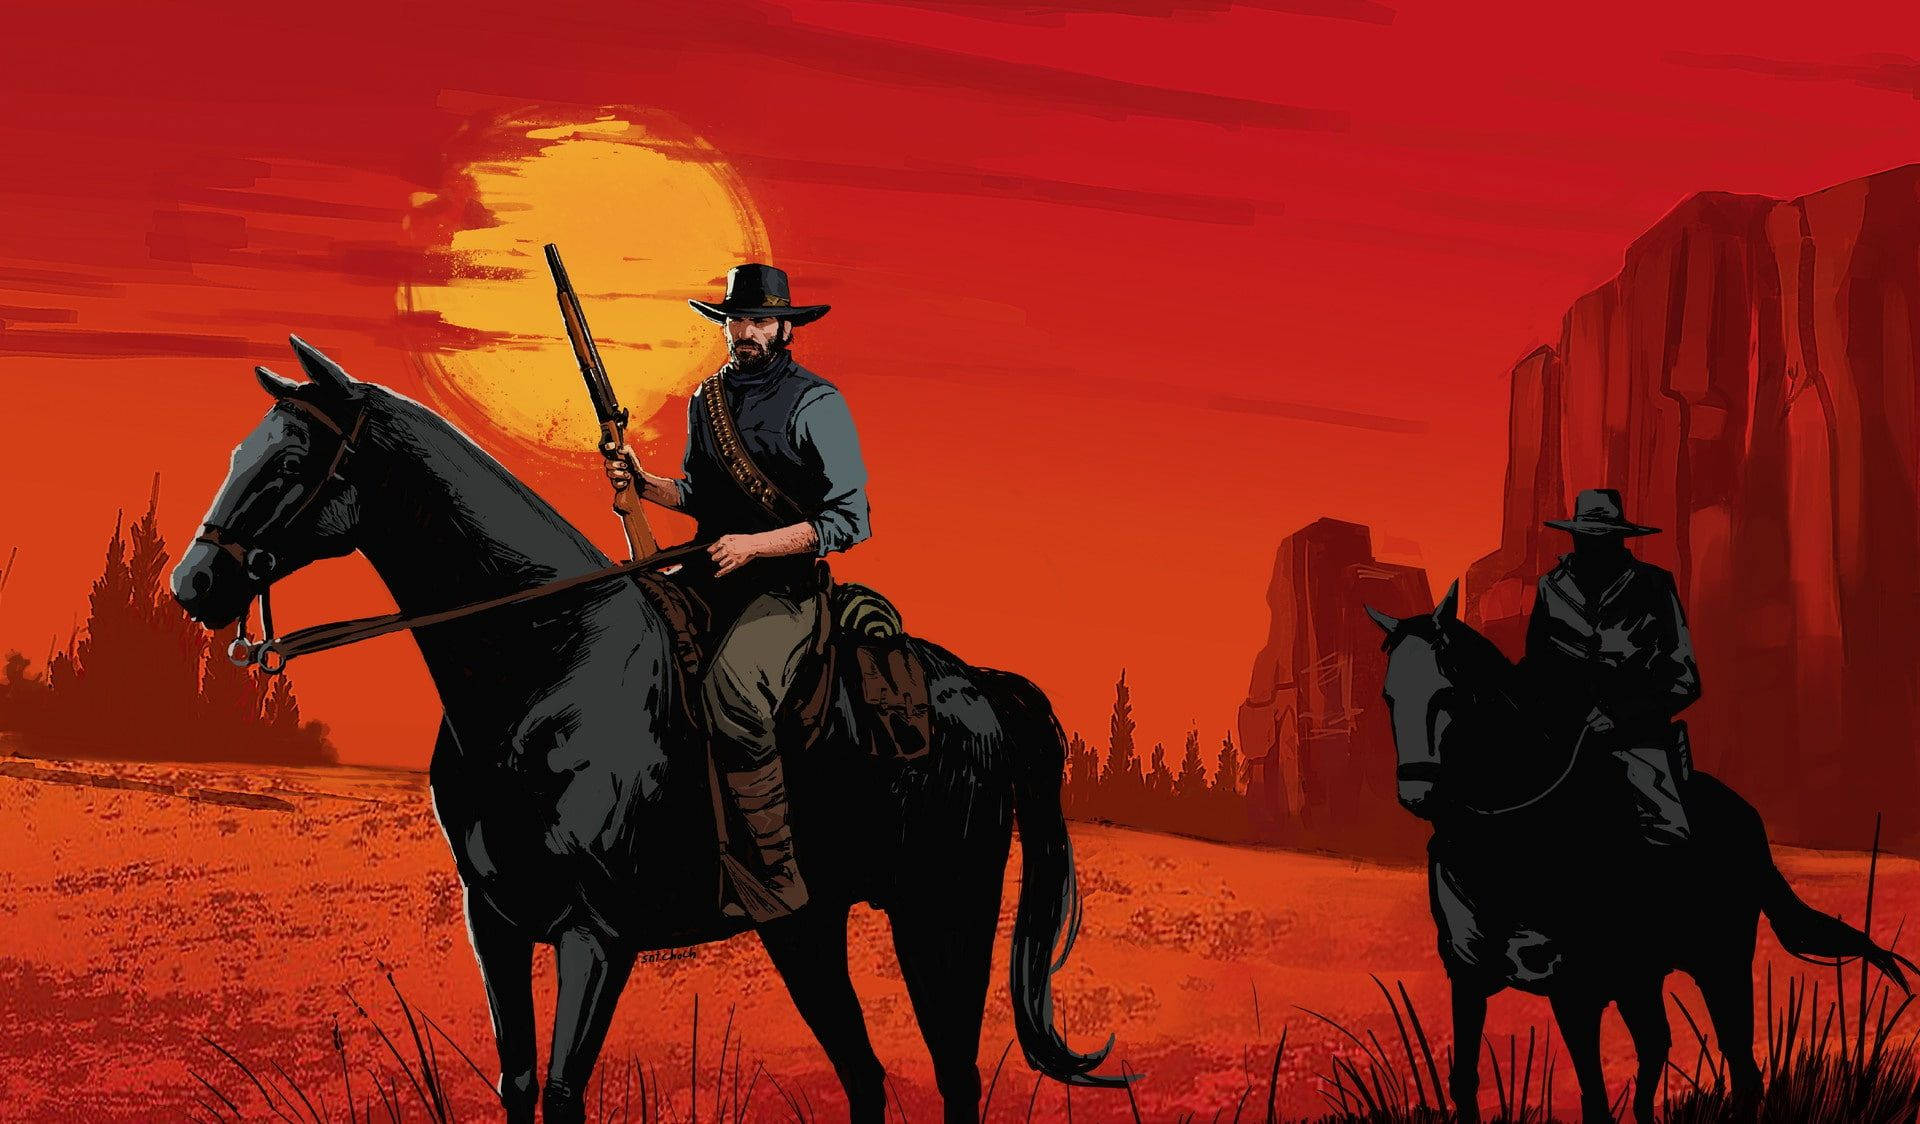 Ride the Wild West with this Red Dead Redemption 2 Horse Wallpaper